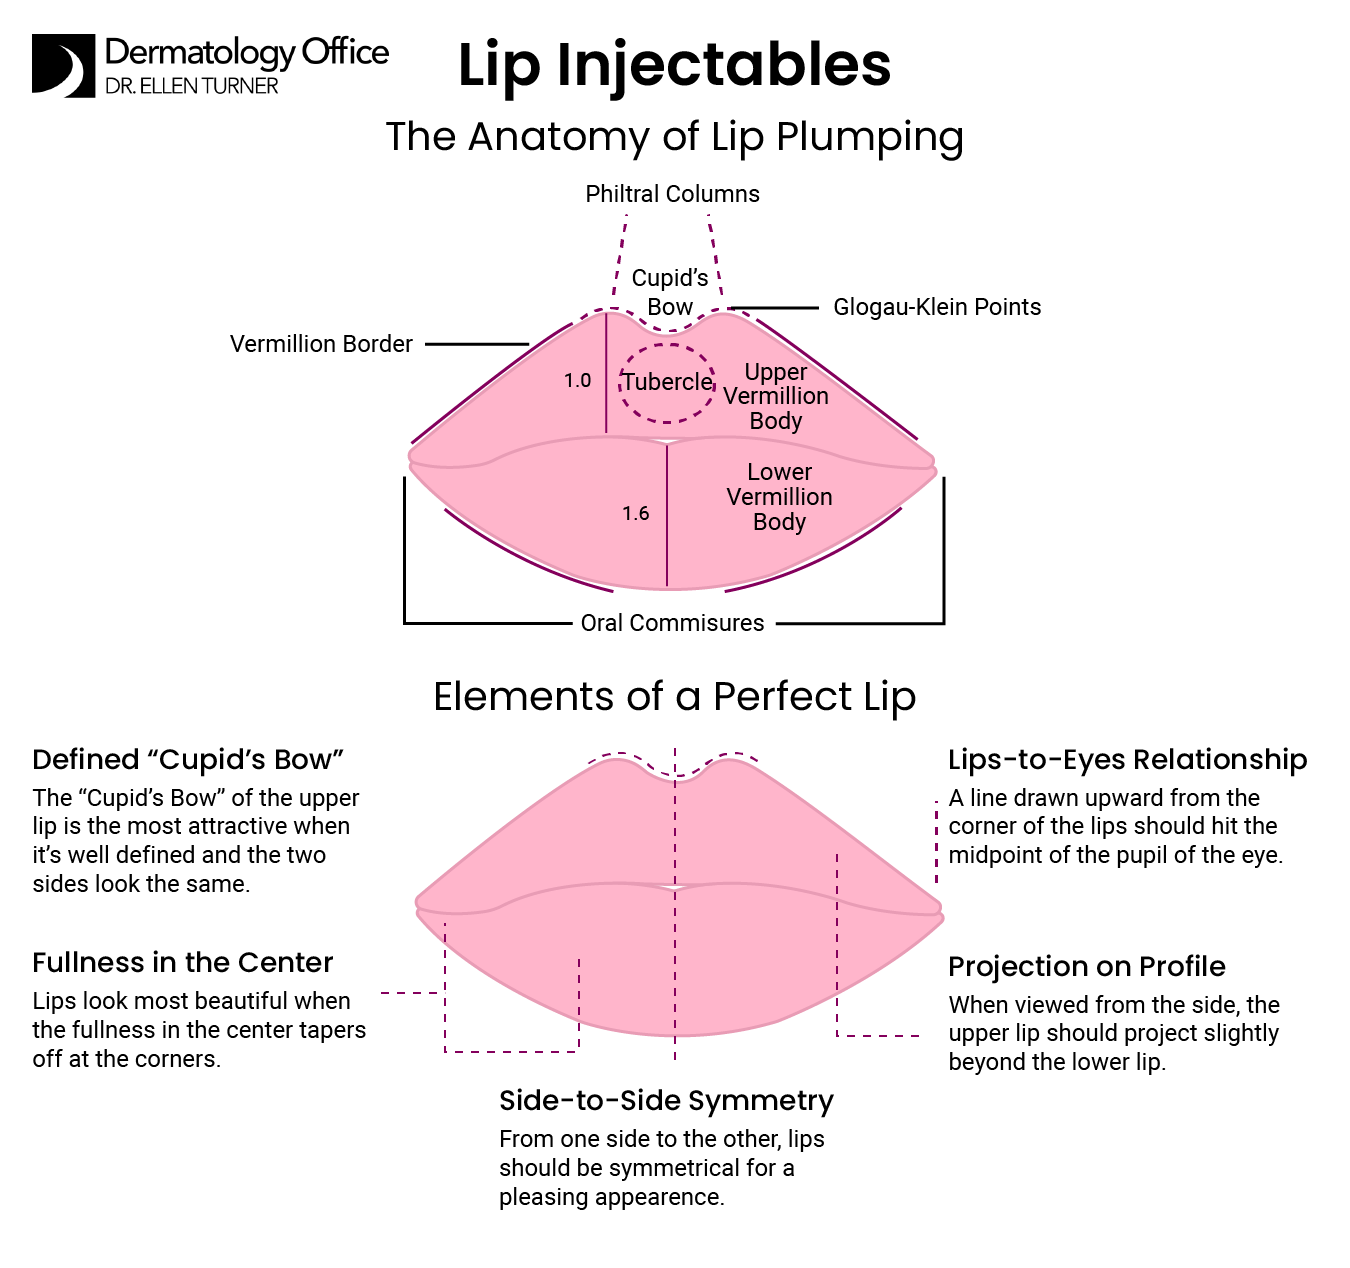 The Dermatology Office team uses lip injections in Dallas to shape the Cupid’s bow and more.